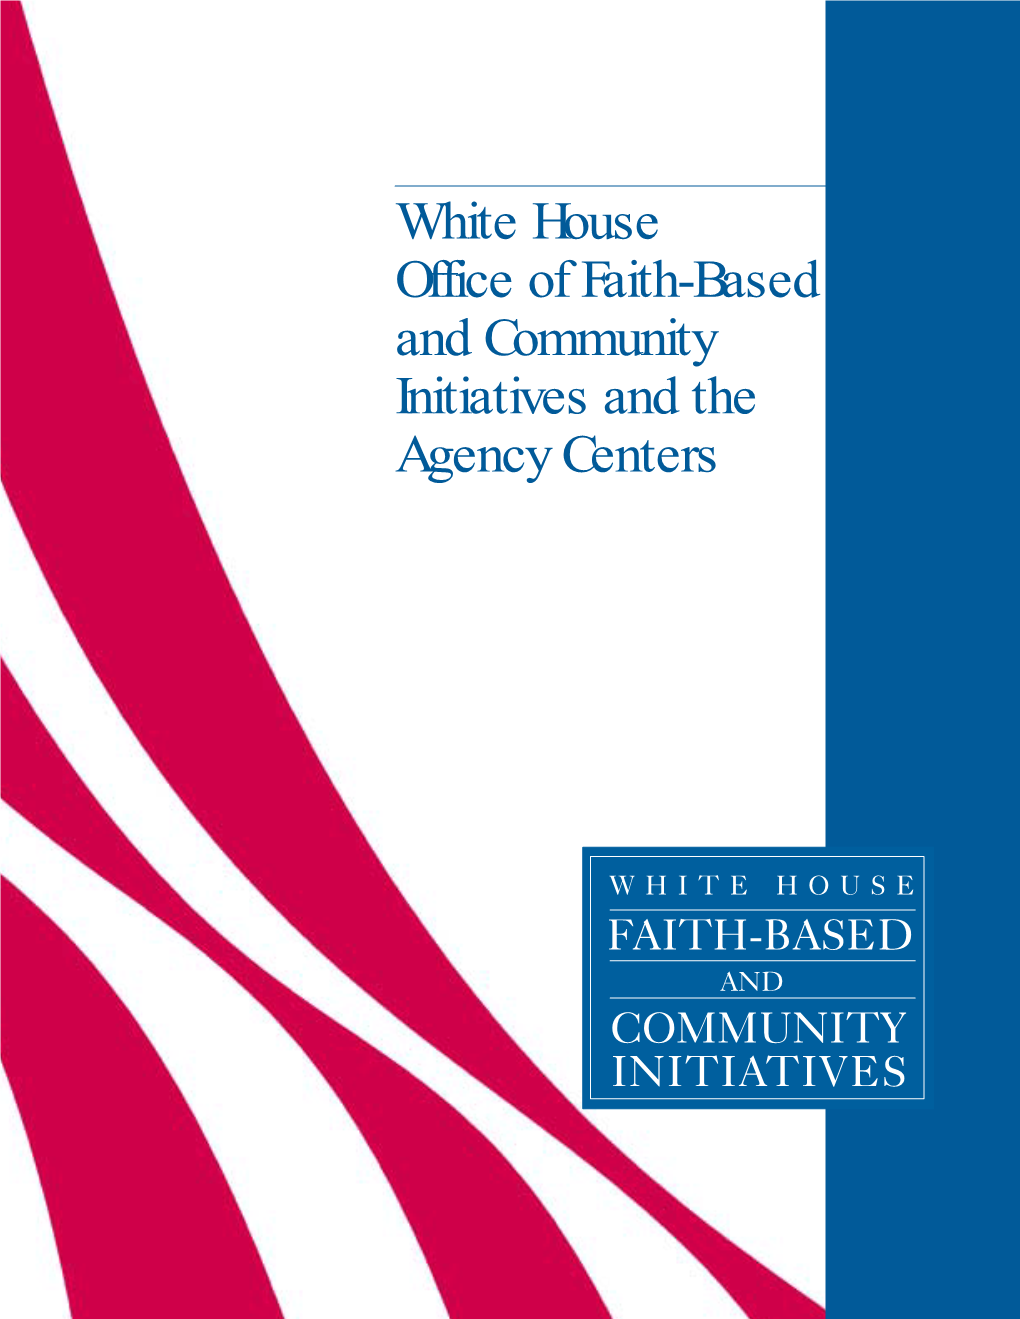 White House Office of Faith-Based and Community Initiatives and the Agency Centers 34788 B-DTI-Agency 2/7/03 4:10 PM Page 2